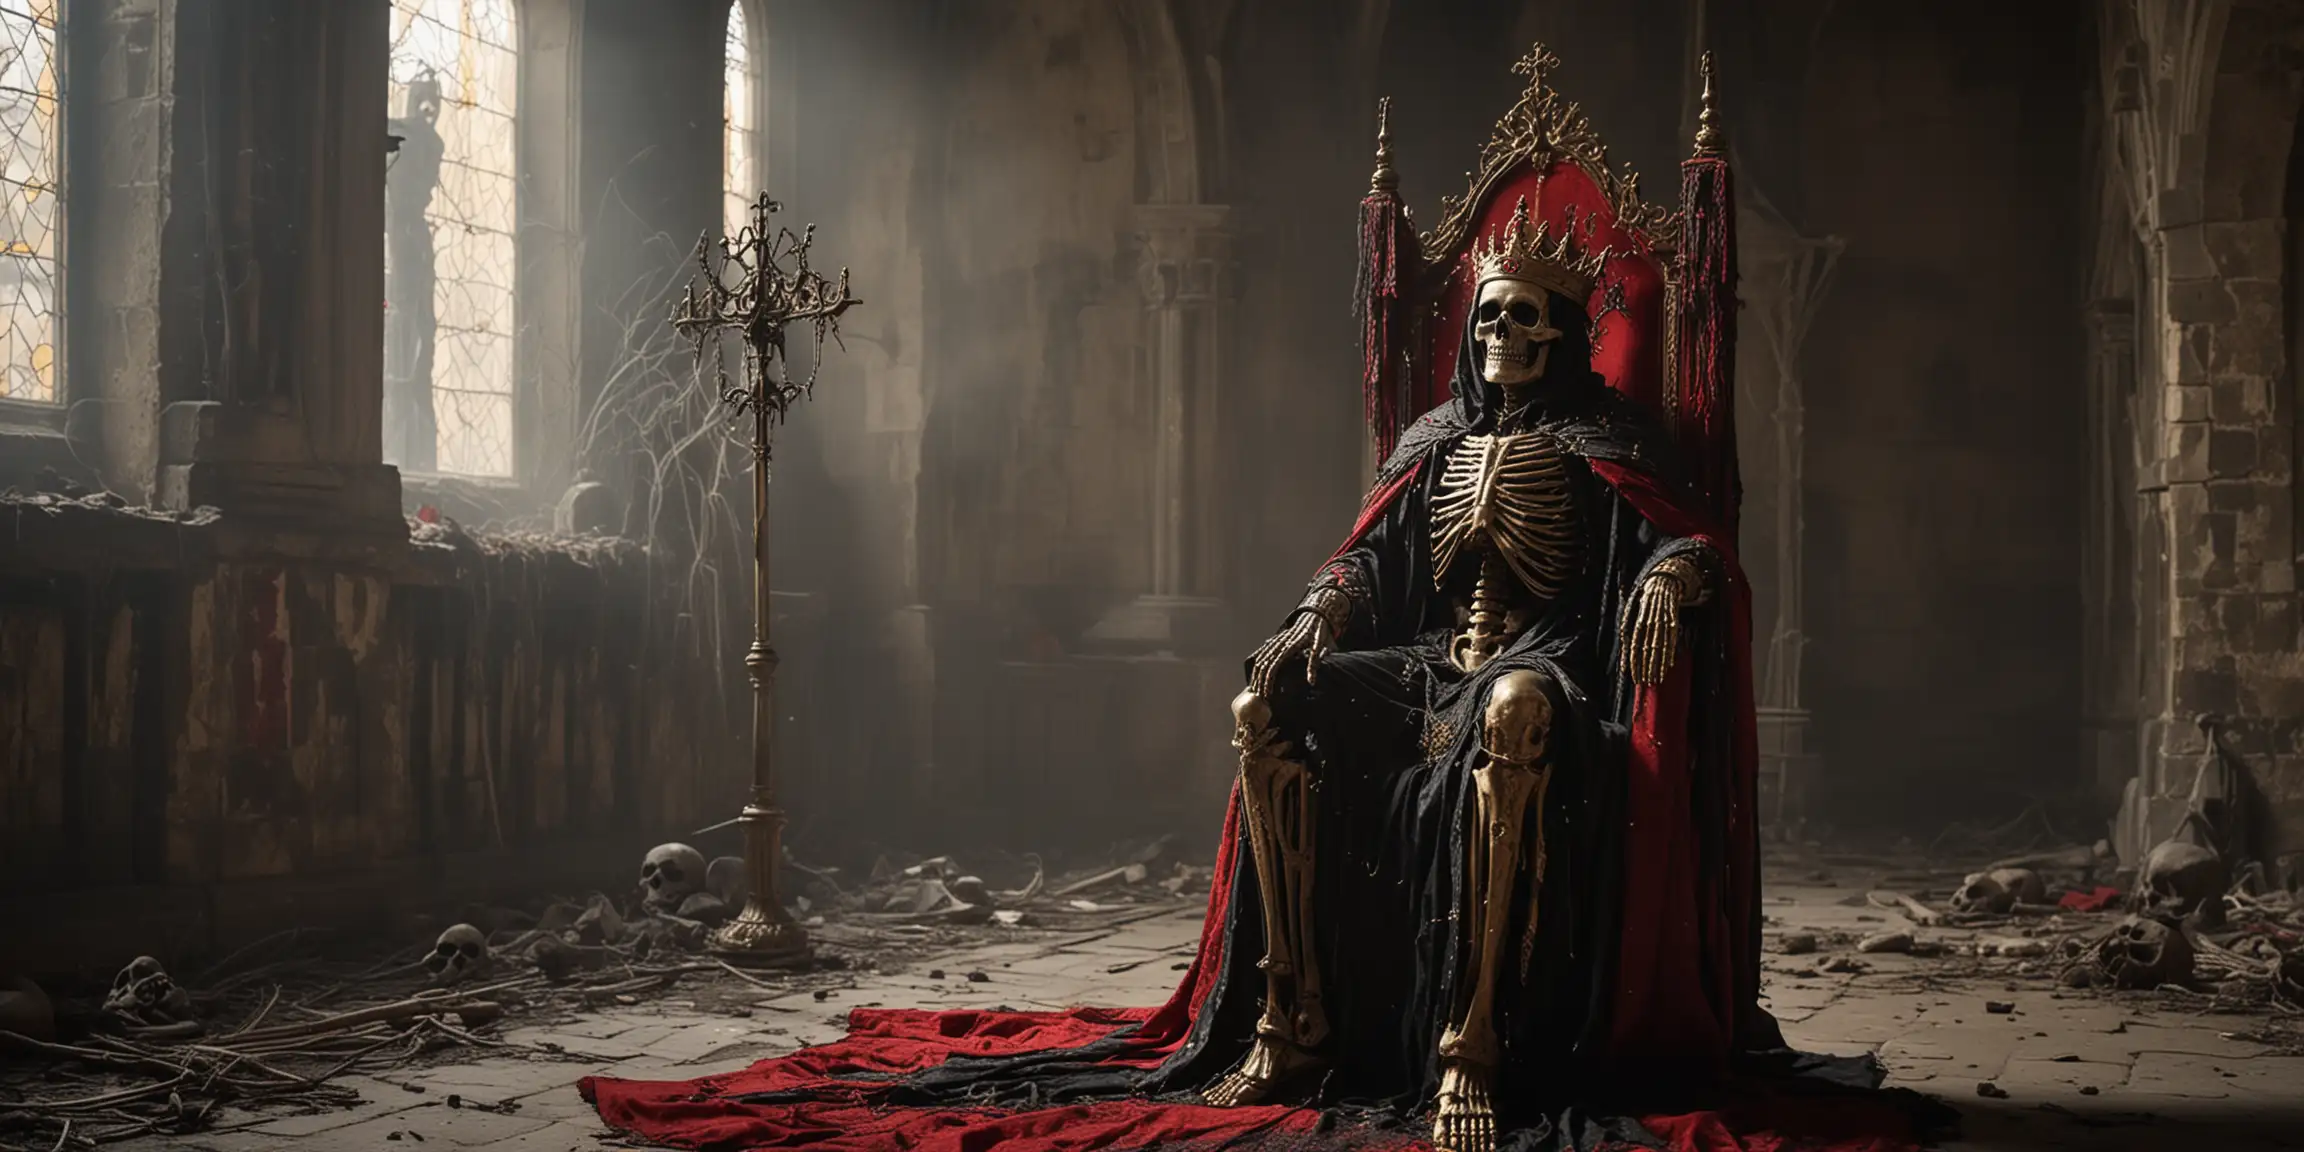 Skeleton king. Old church, black and red padded throne, robe, gold drip, cobwebs, old, dusty. 